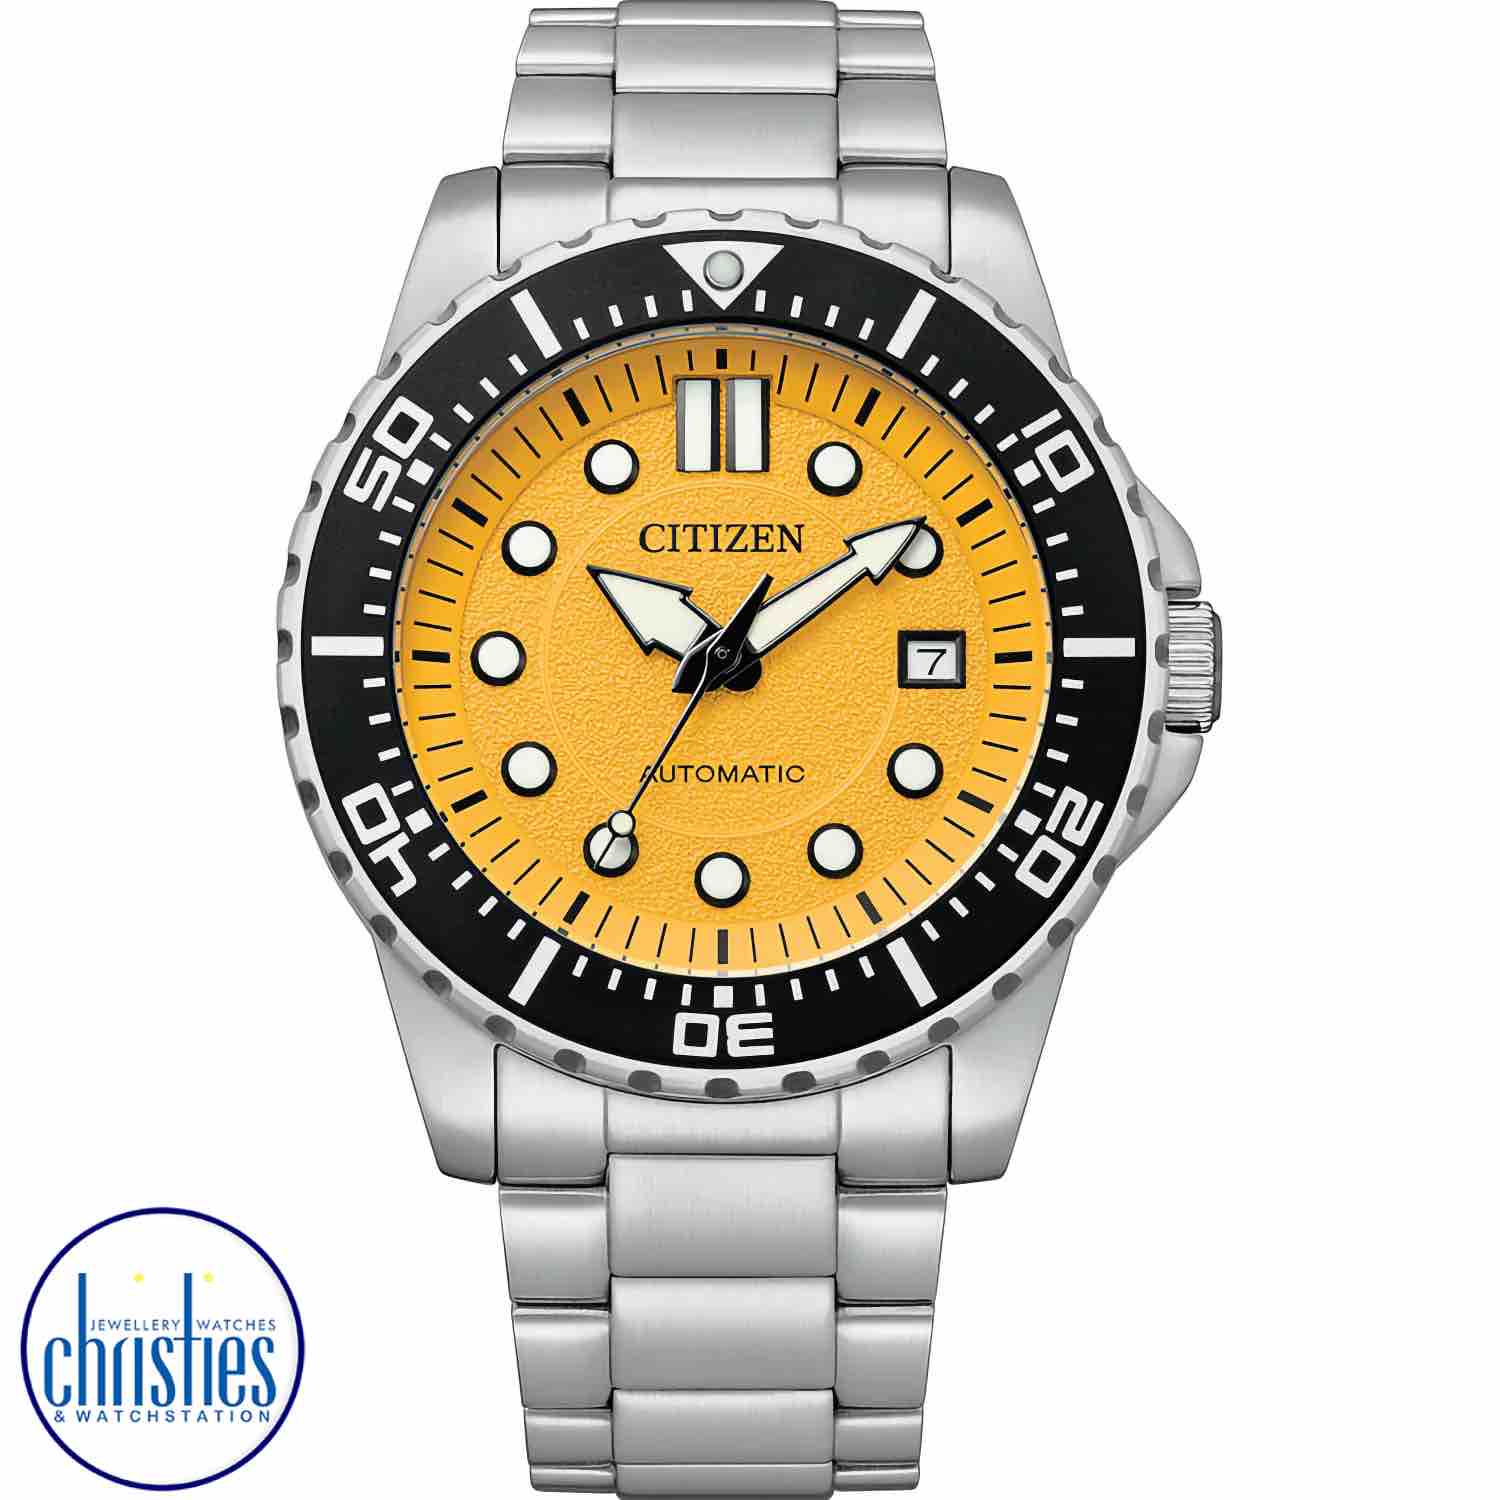 NJ0170-83Z CITIZEN Automatic Watch. Soar to new heights with this modernised timepiece from our Mechanical Collection.